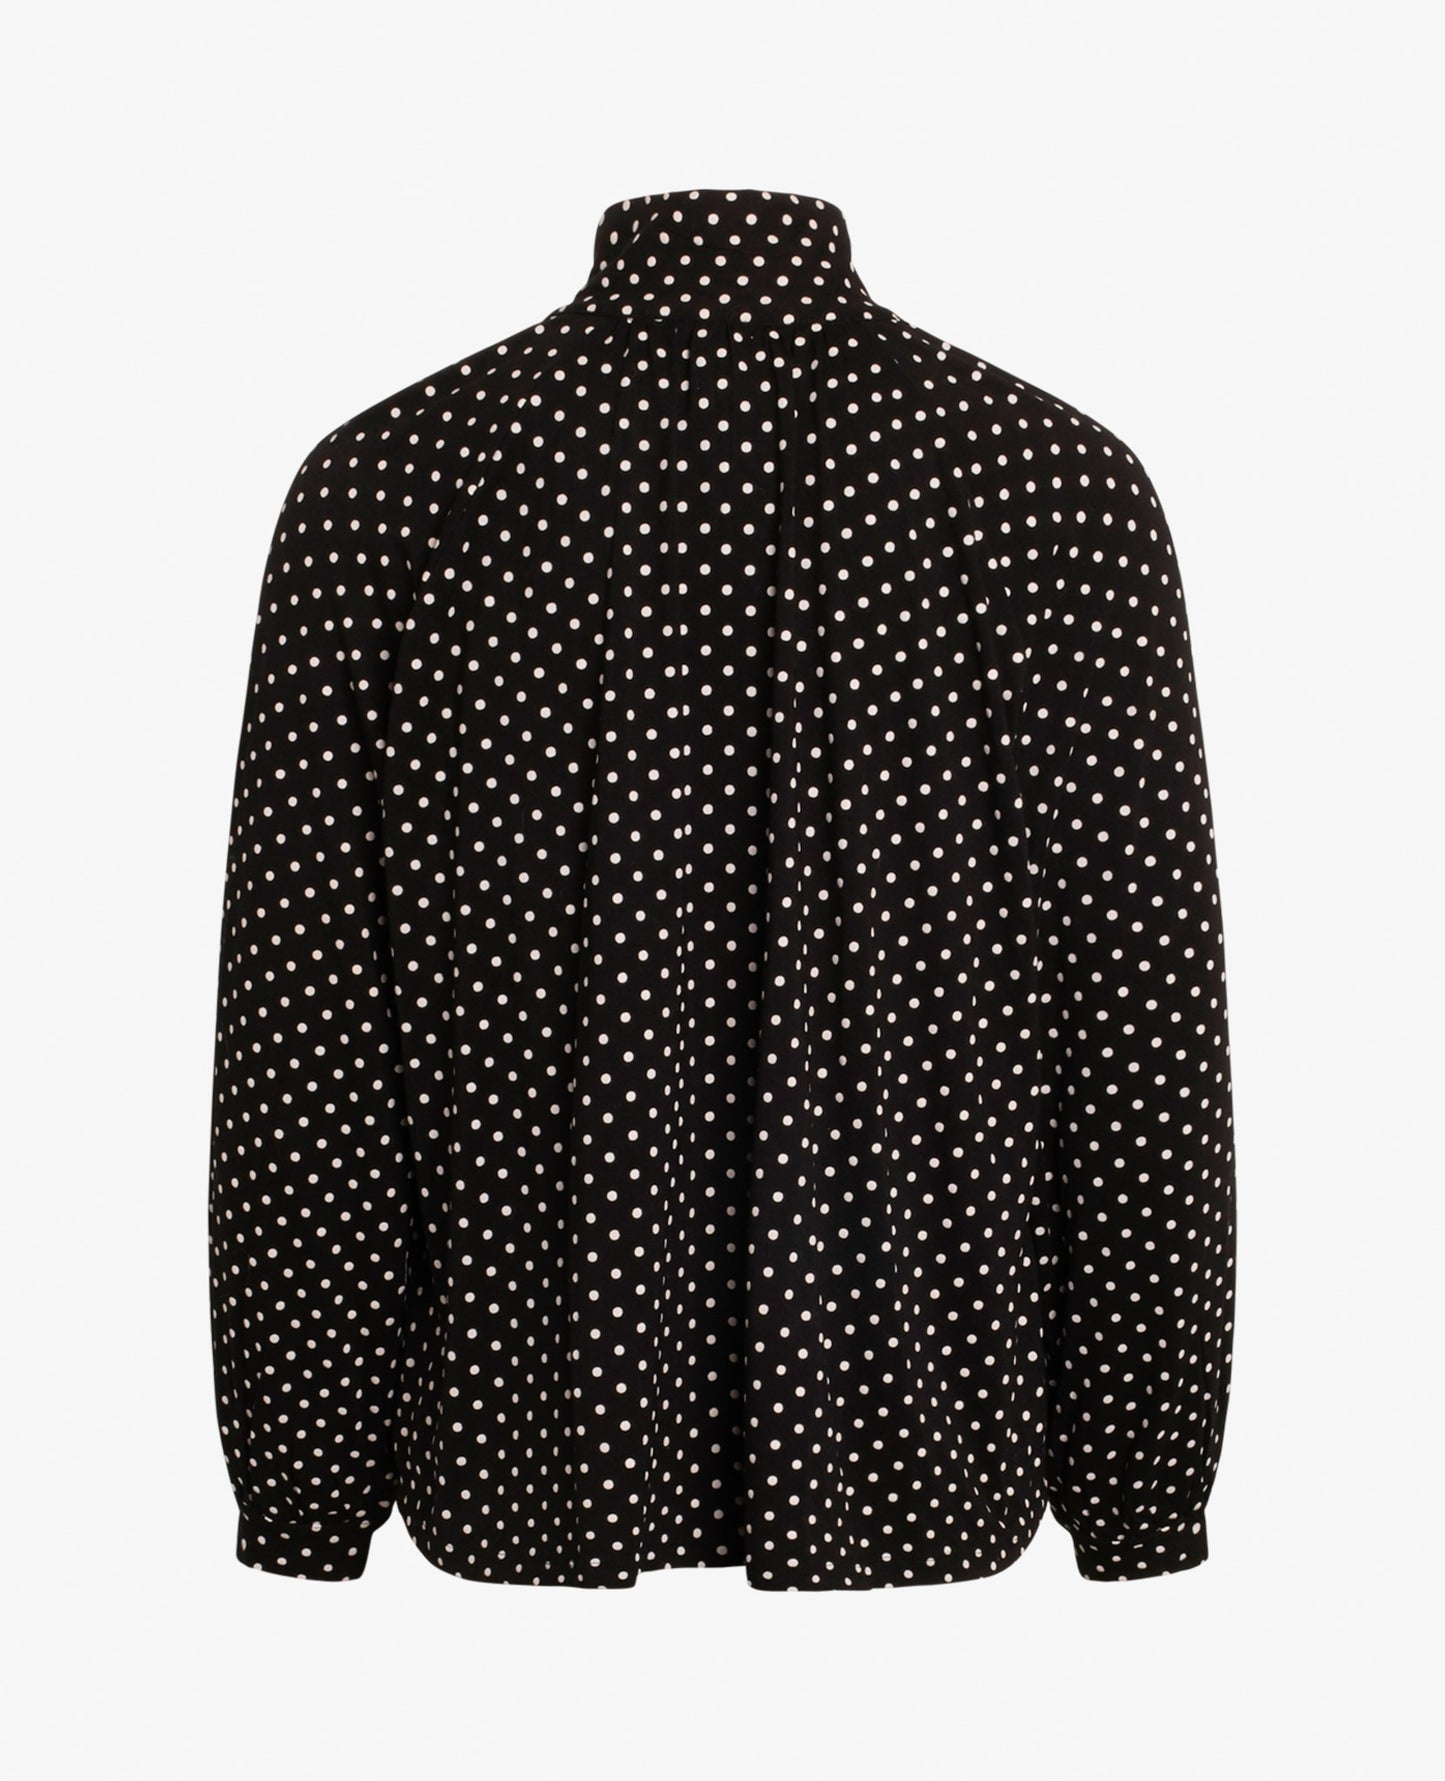 DOTTED JERSEY BLOUSE